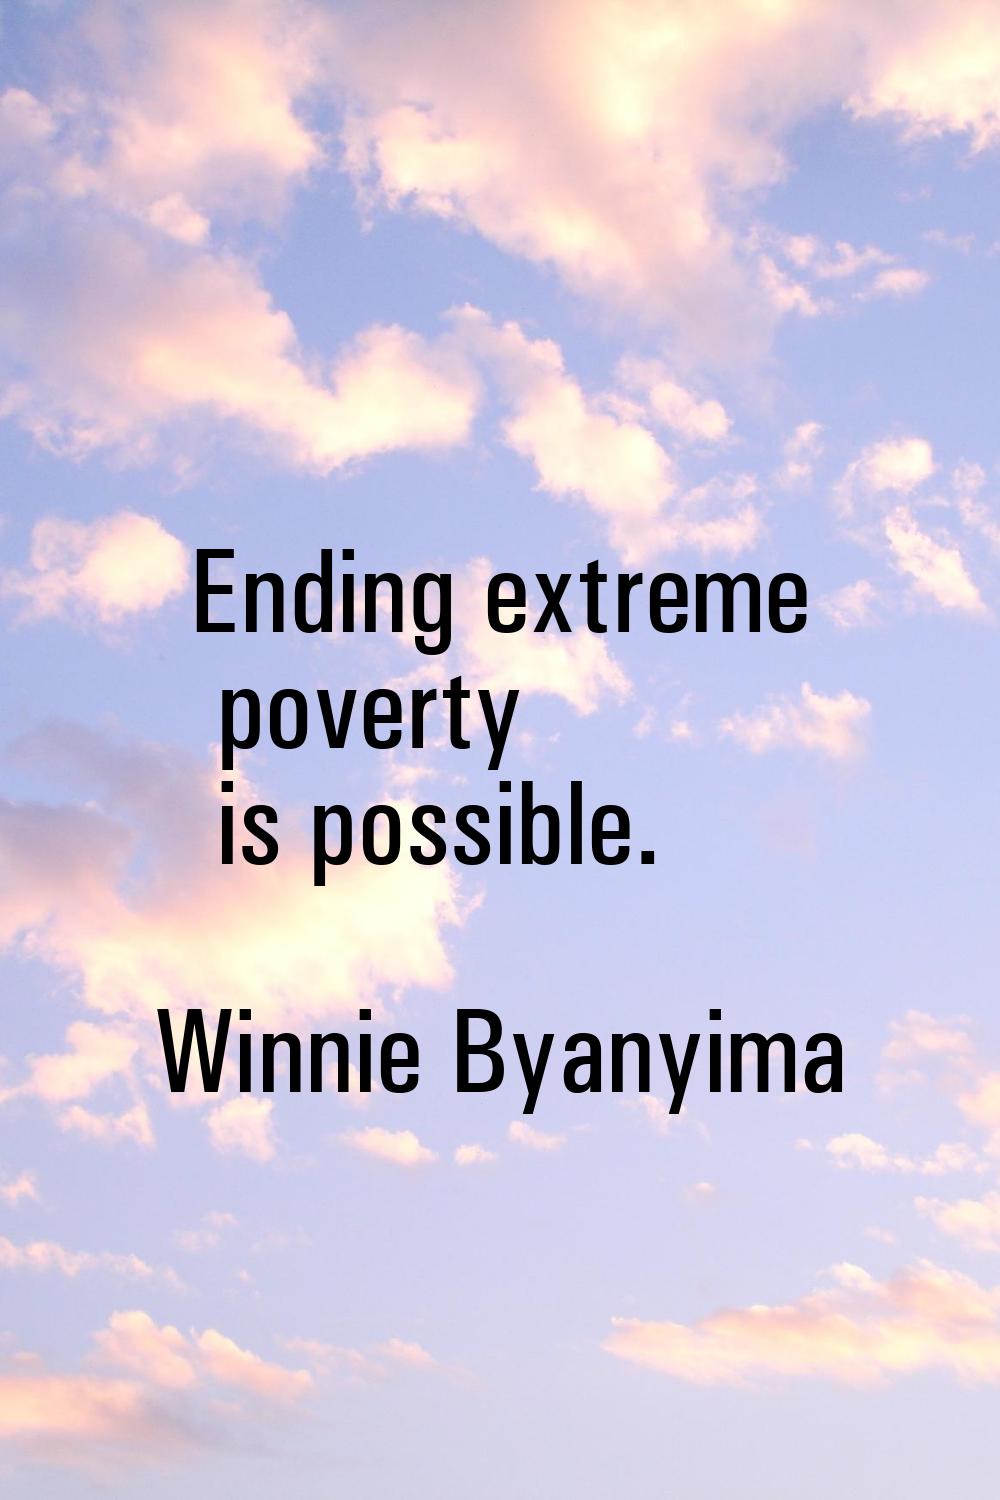 Ending extreme poverty is possible.